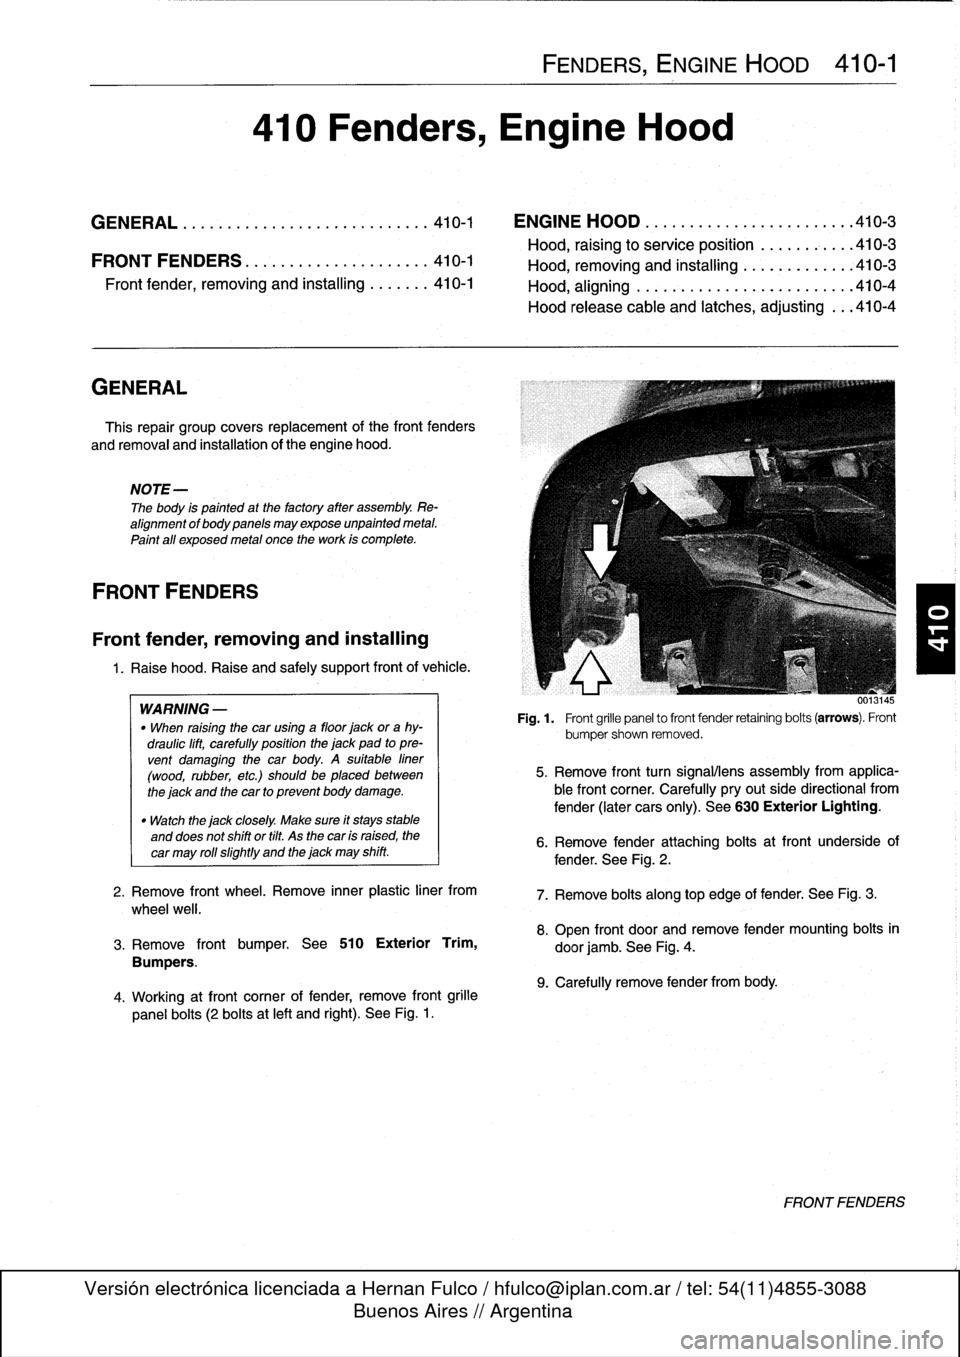 BMW 323i 1995 E36 Workshop Manual 
GENERAL

This
repair
group
covers
replacement
of
the
front
fenders

and
removal
and
installation
of
the
engine
hood
.

NOTE-

The
body
is
painted
at
the
factoryafter
assembly
.
Re-
alignment
of
body
